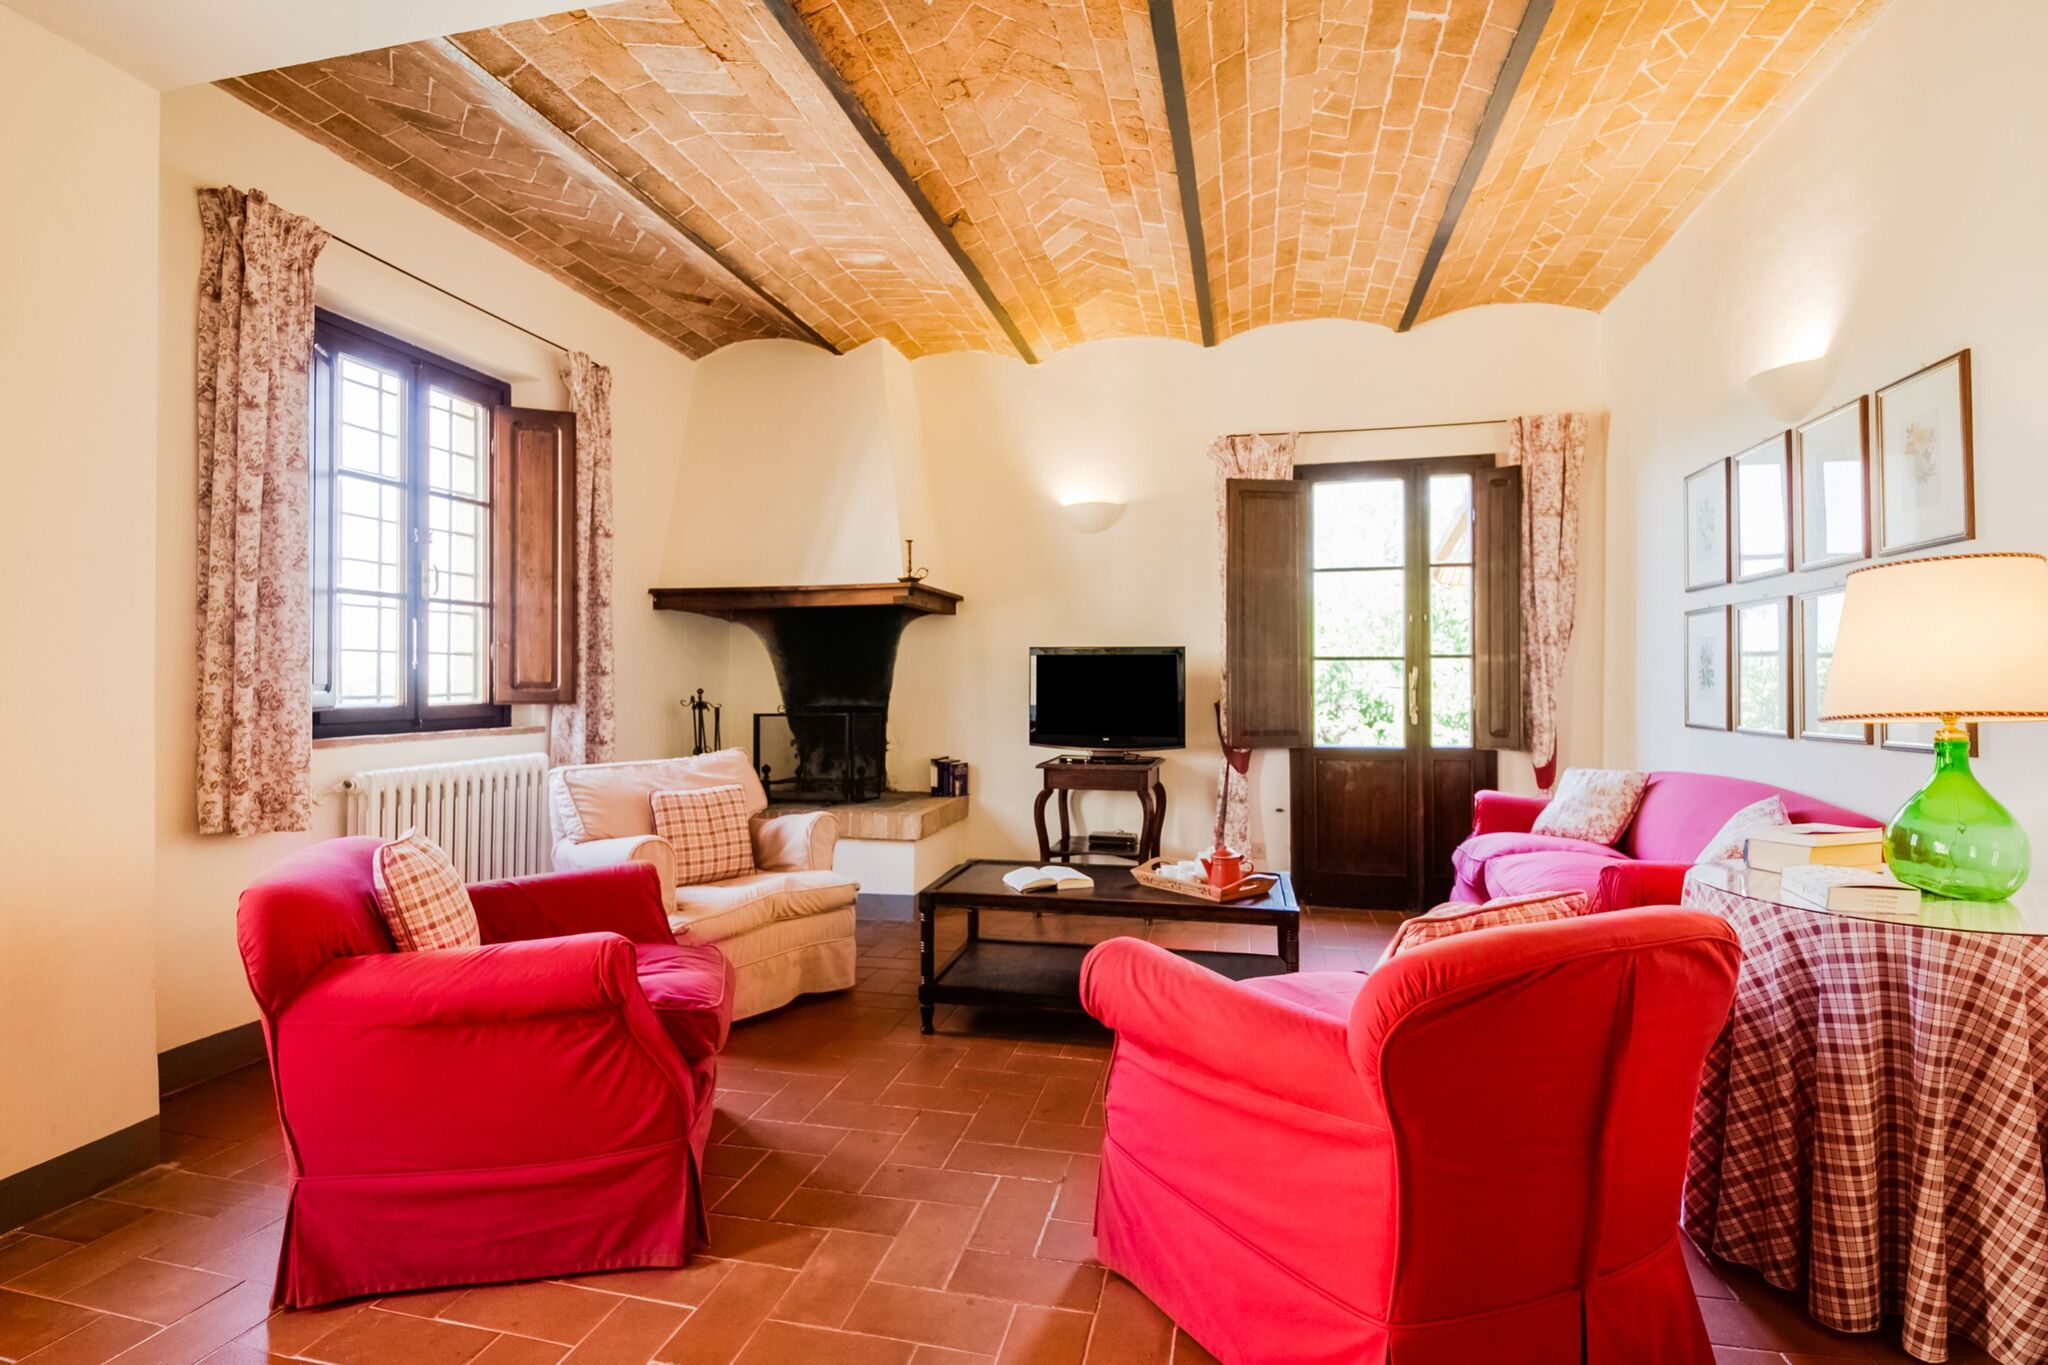 small village of beautiful apartments in the green Tuscan hills and olive groves